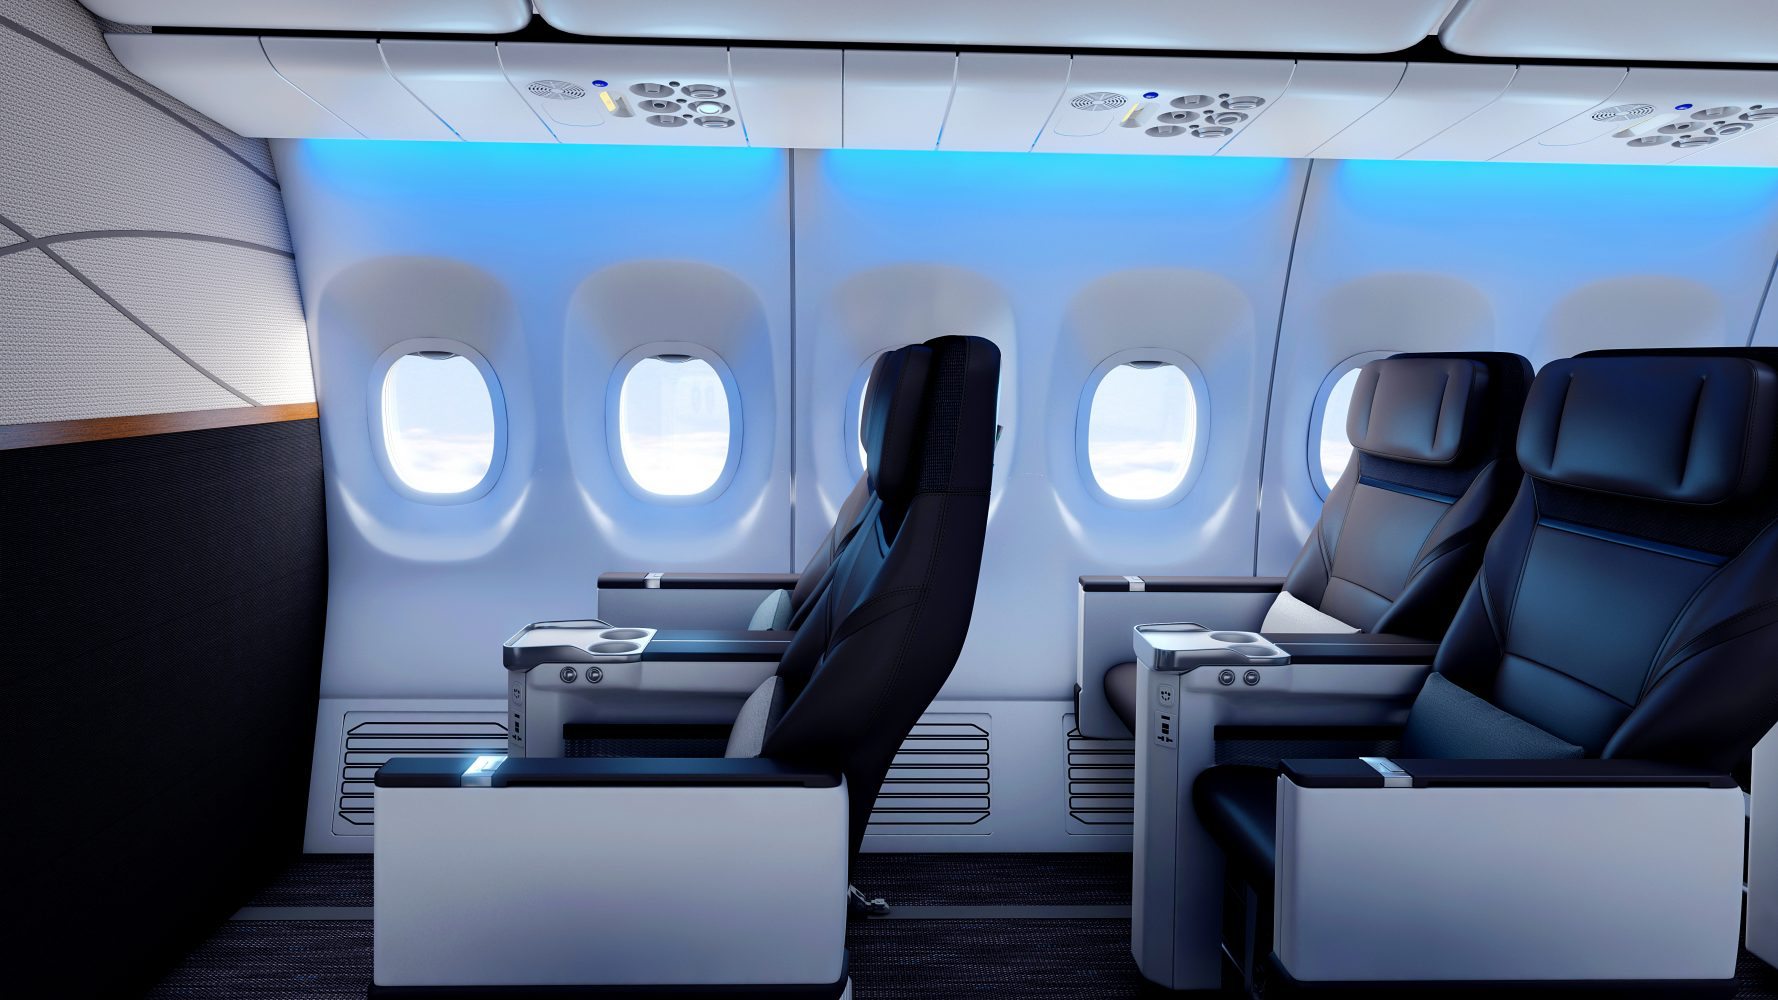 Alaska's first class seats will be the same across its fleet, including on planes that serve New York-California markets. 